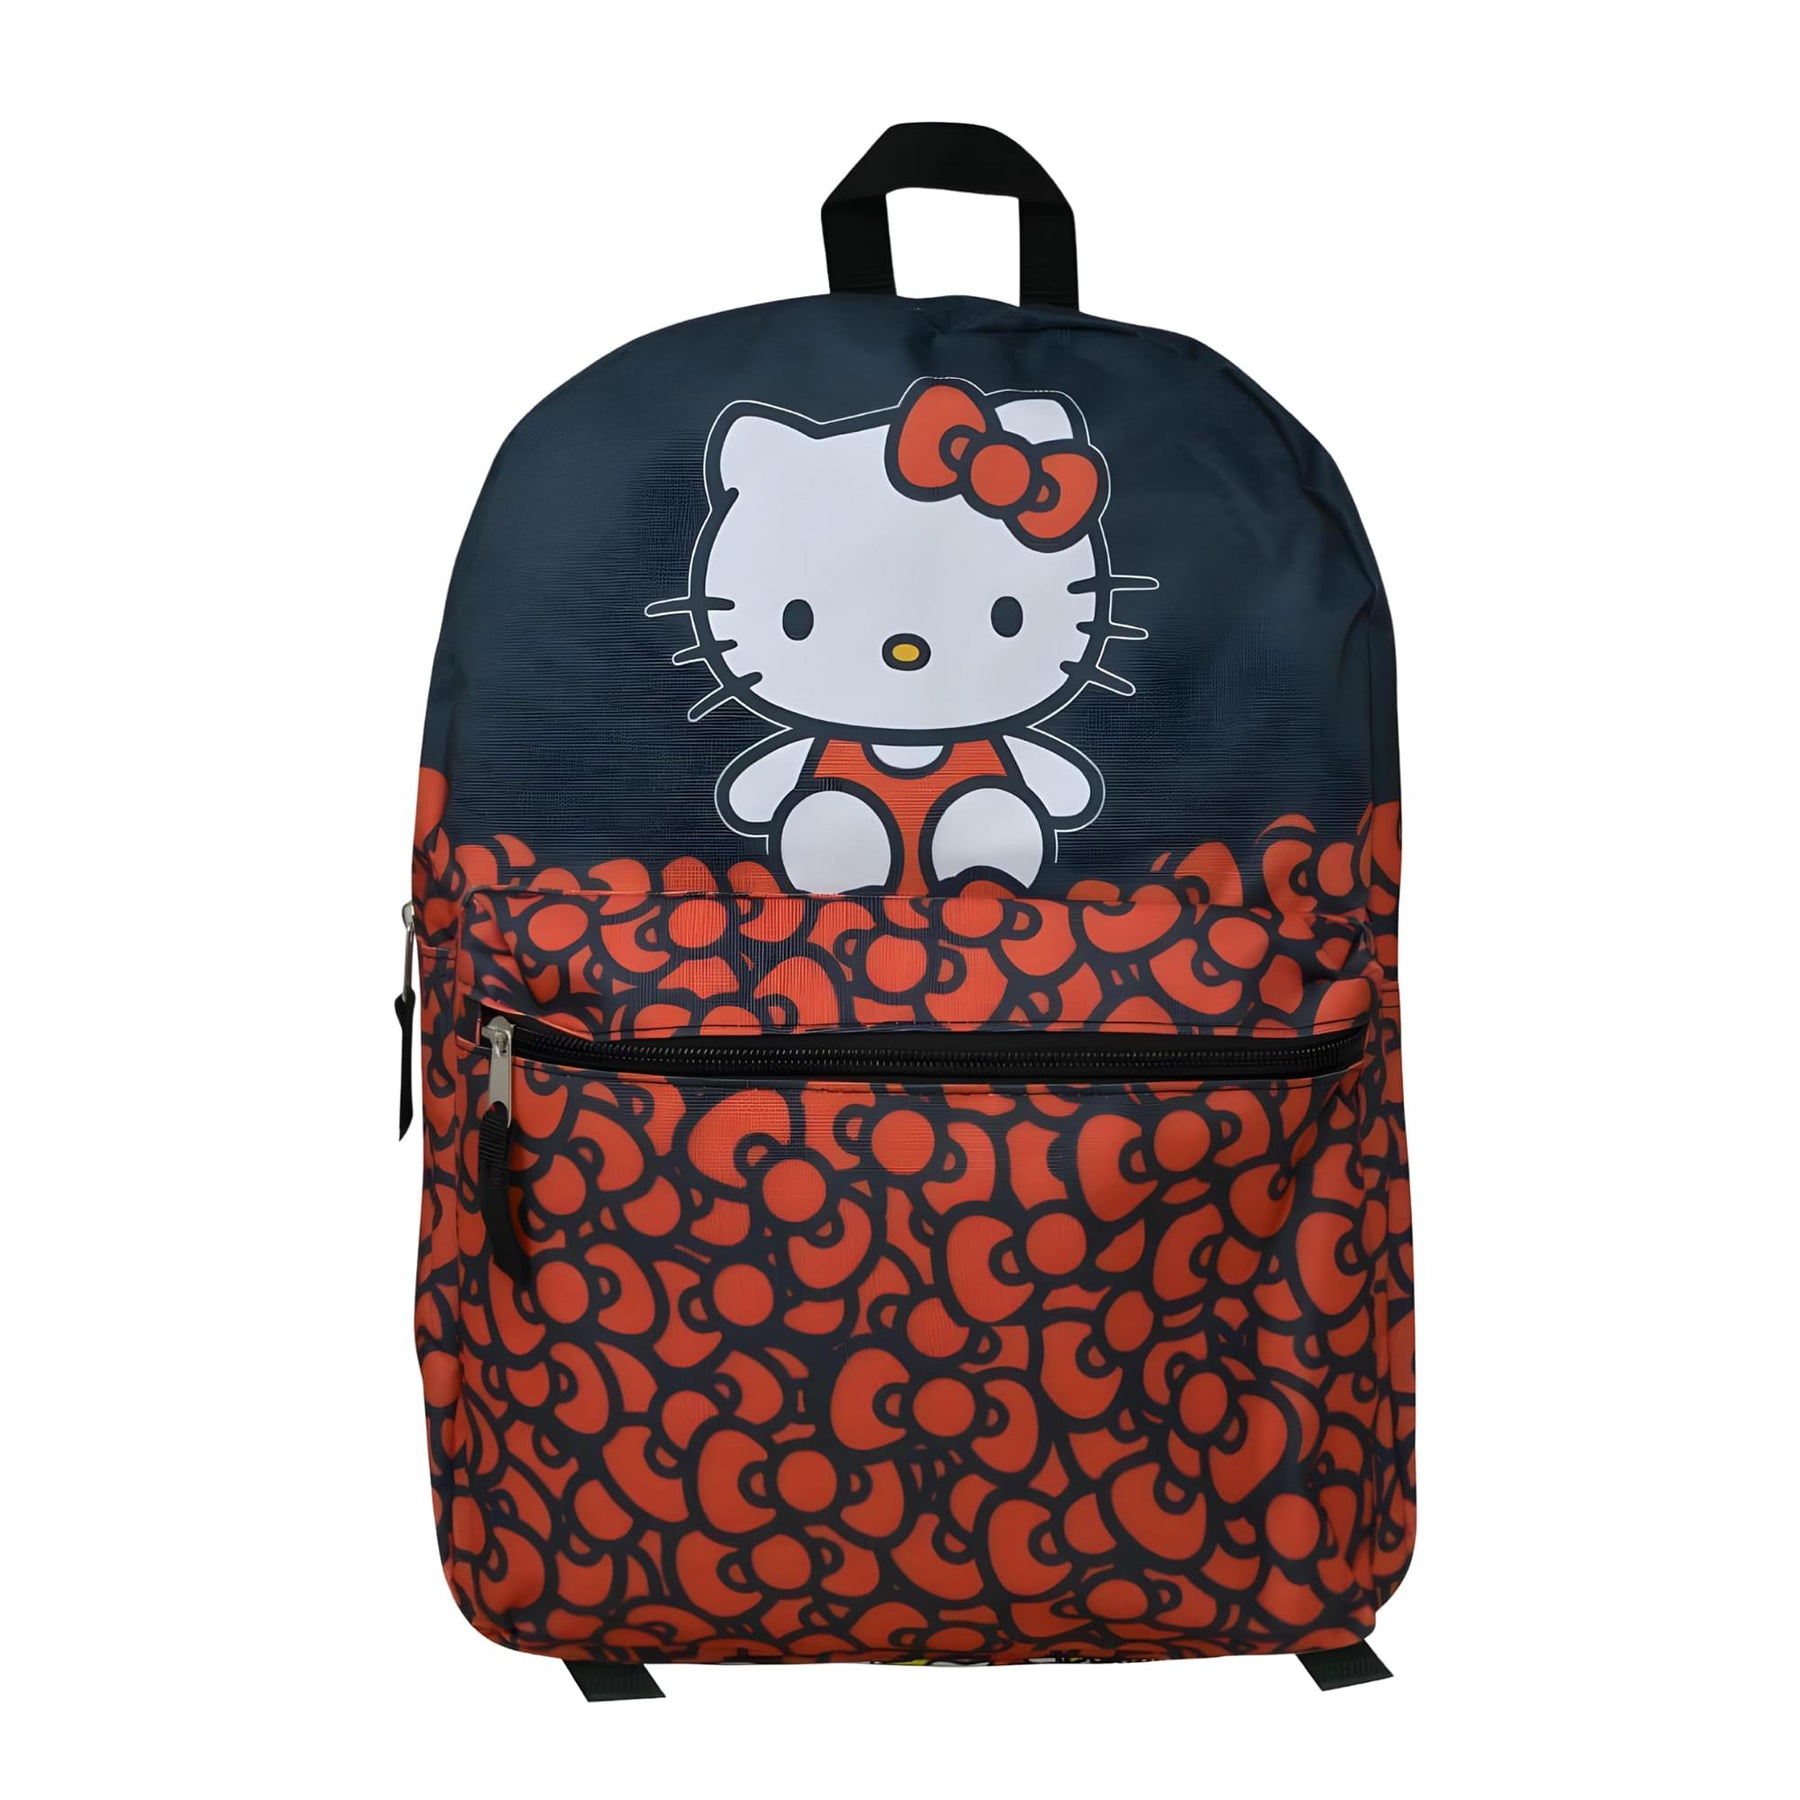 Sanrio Hello Kitty Red Bows 16 Inch Kids Backpack